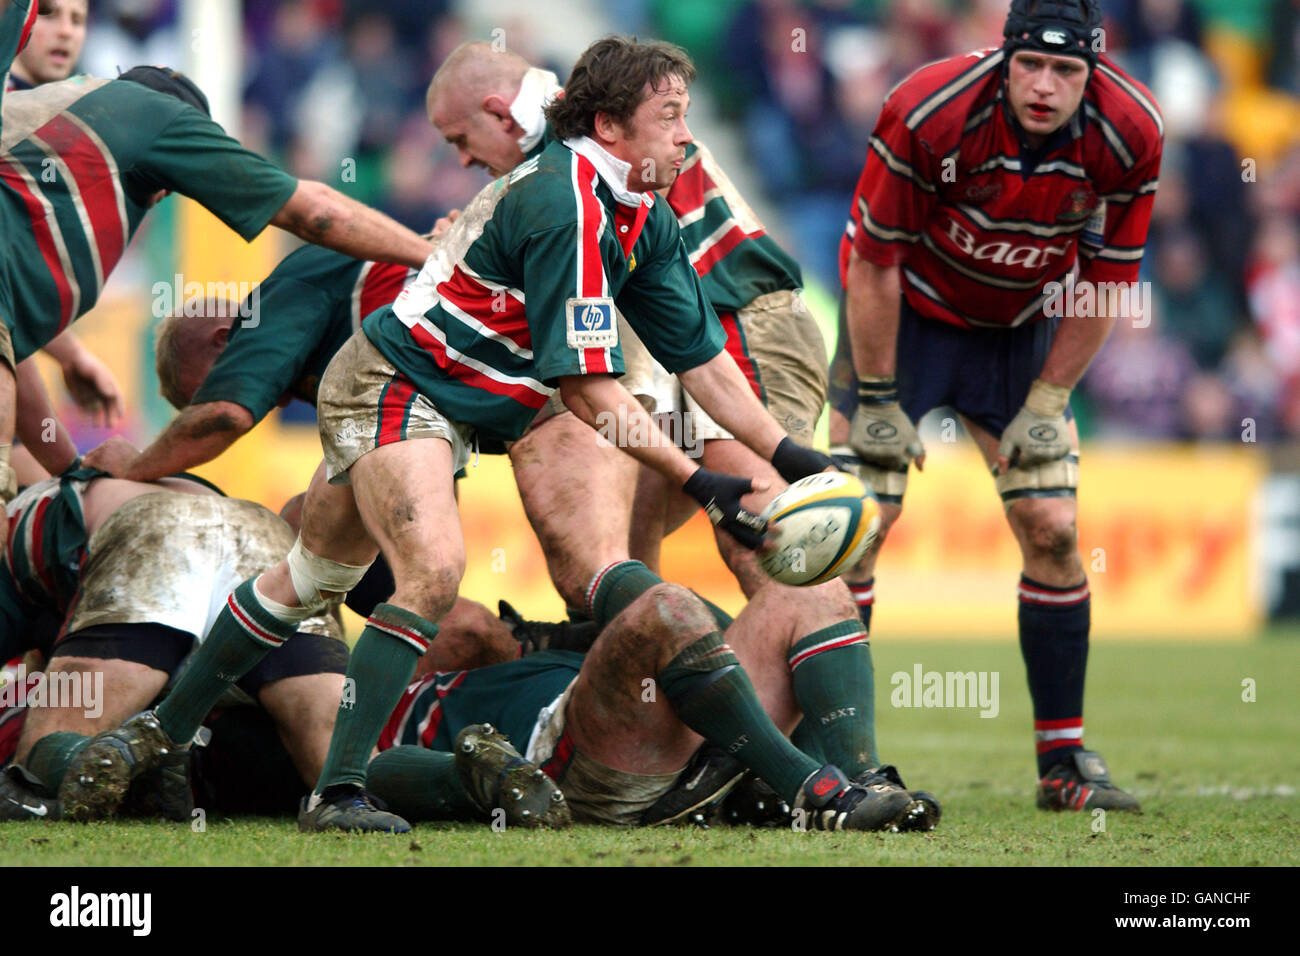 Rugby Union - Powergen Cup - Semifinale - Leicester Tigers / Gloucester. Jamie Hamilton di Leicester Tigers lancia il bal Foto Stock